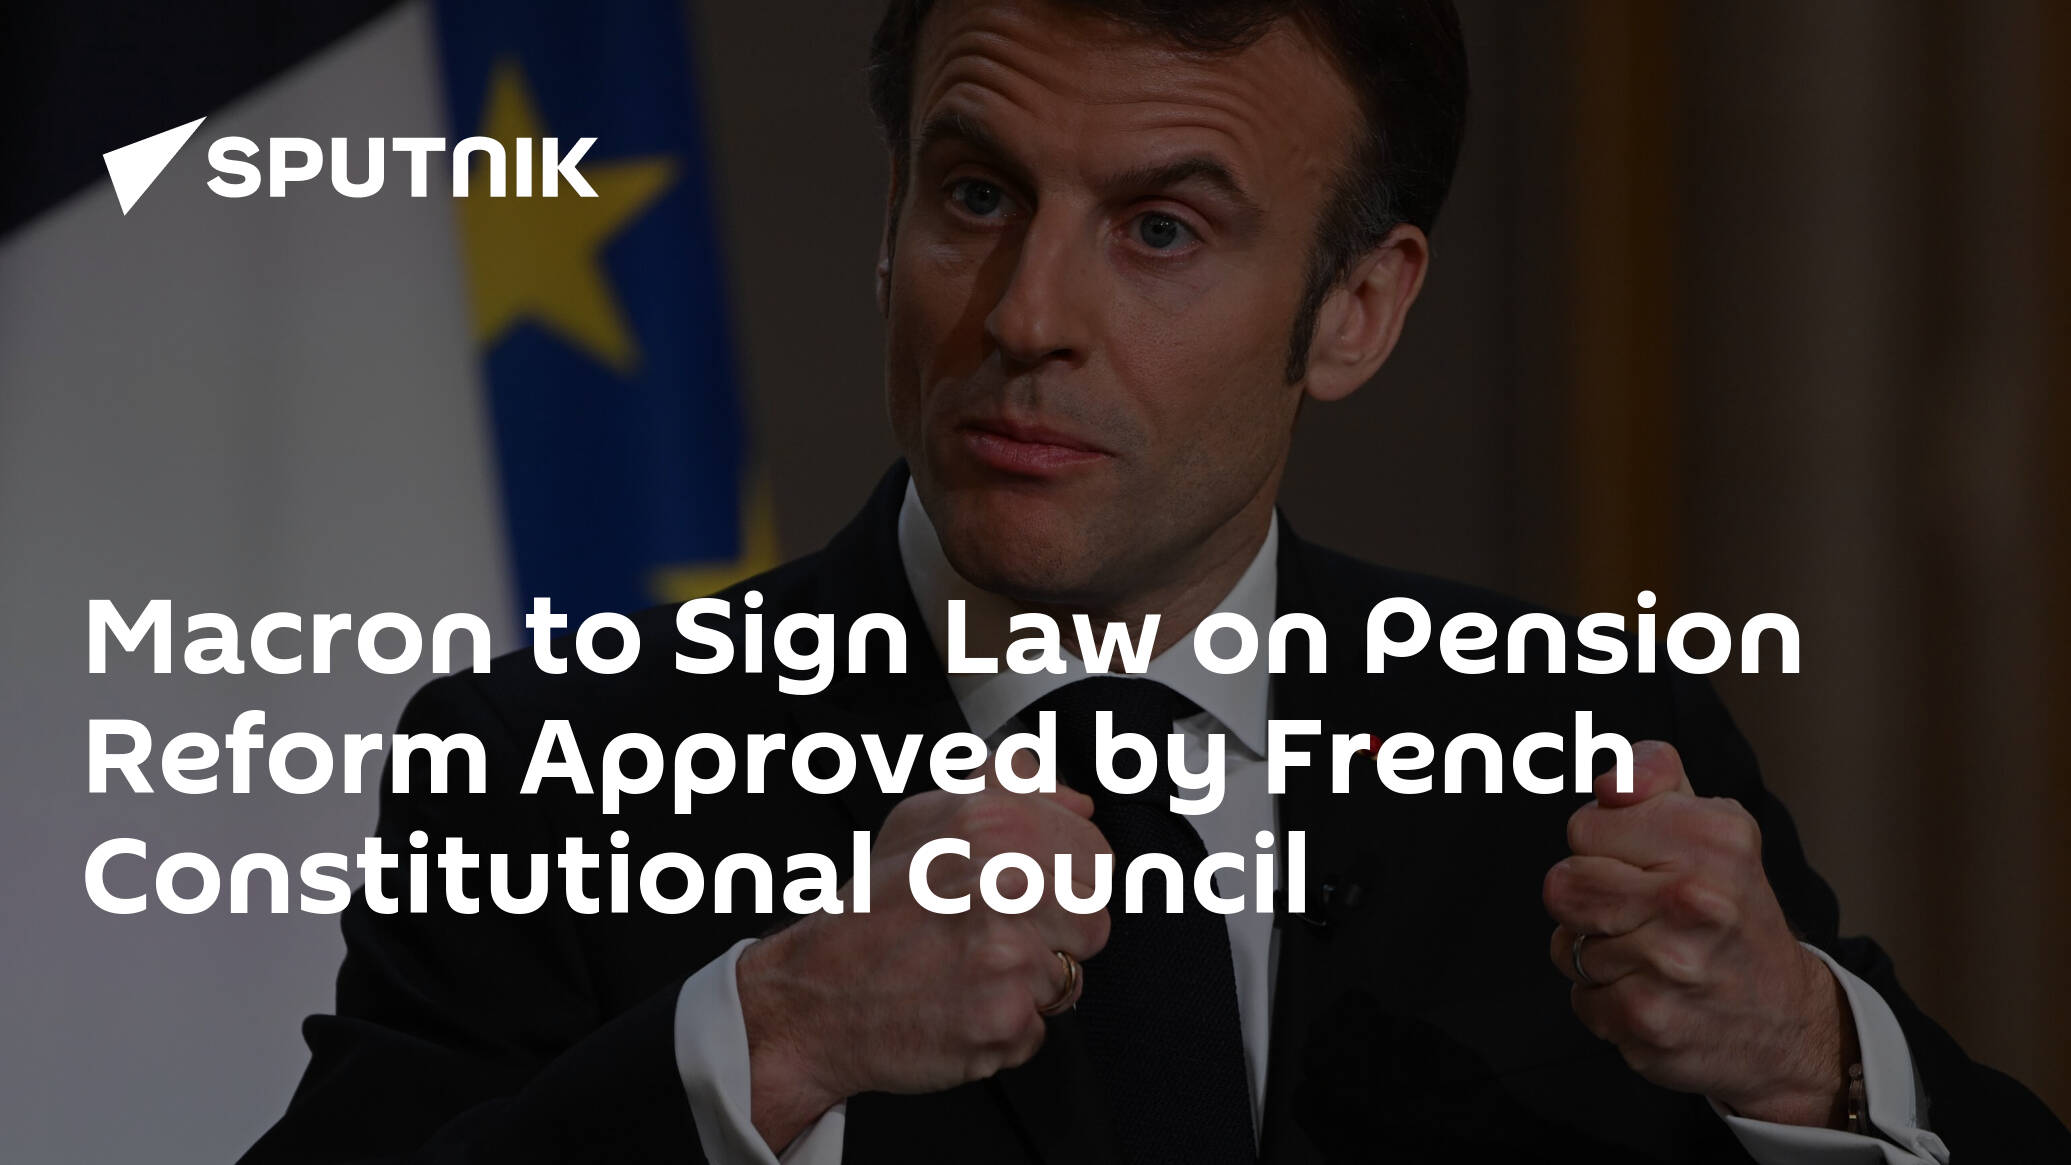 Macron to Sign Law on Pension Reform Approved by French Constitutional Council